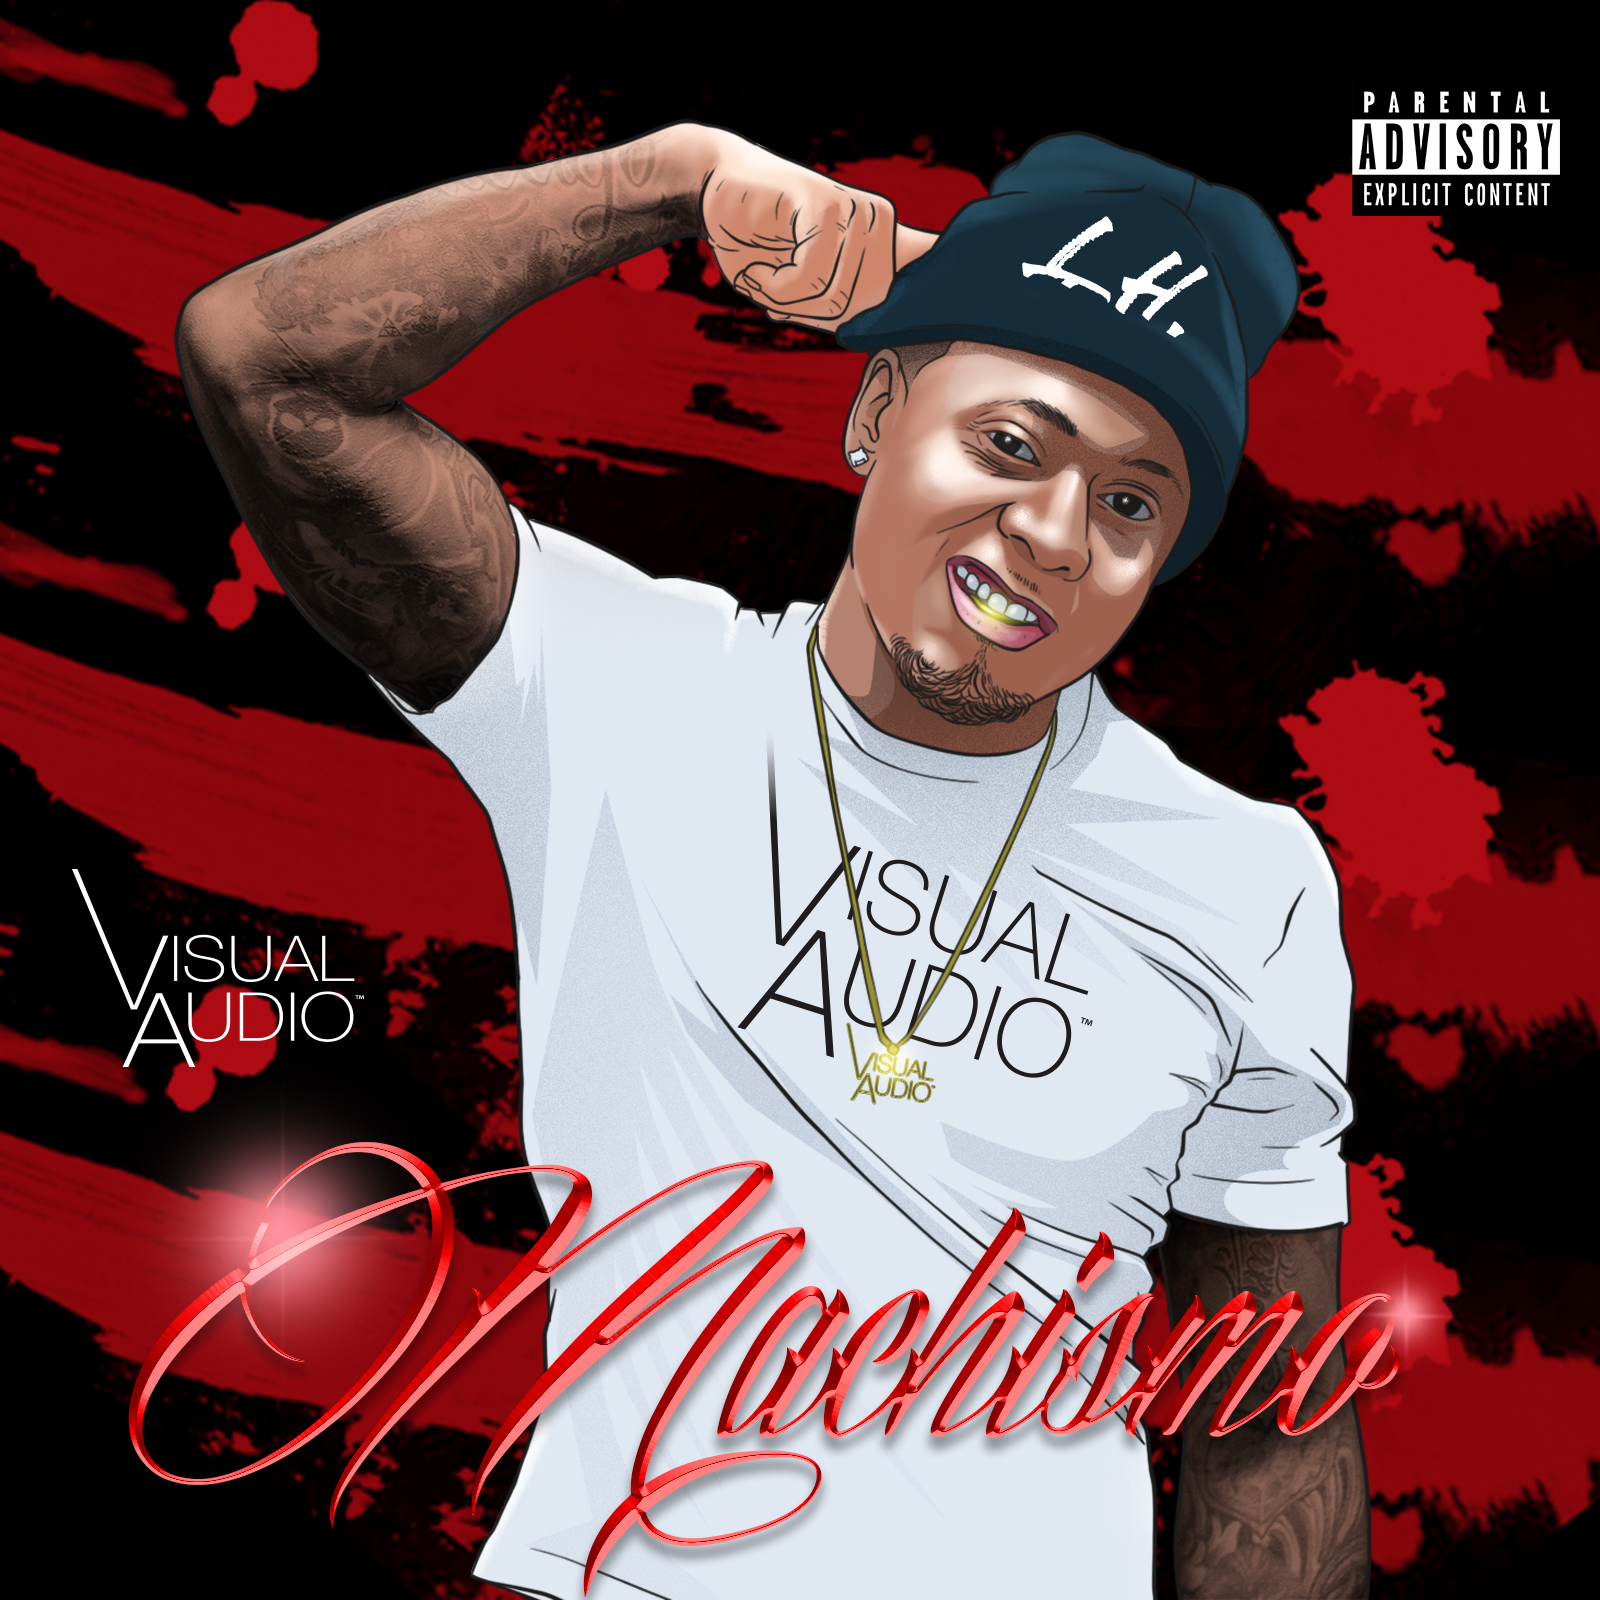 Rapper L.H. Releases his Game-changing New Single ‘Machismo’